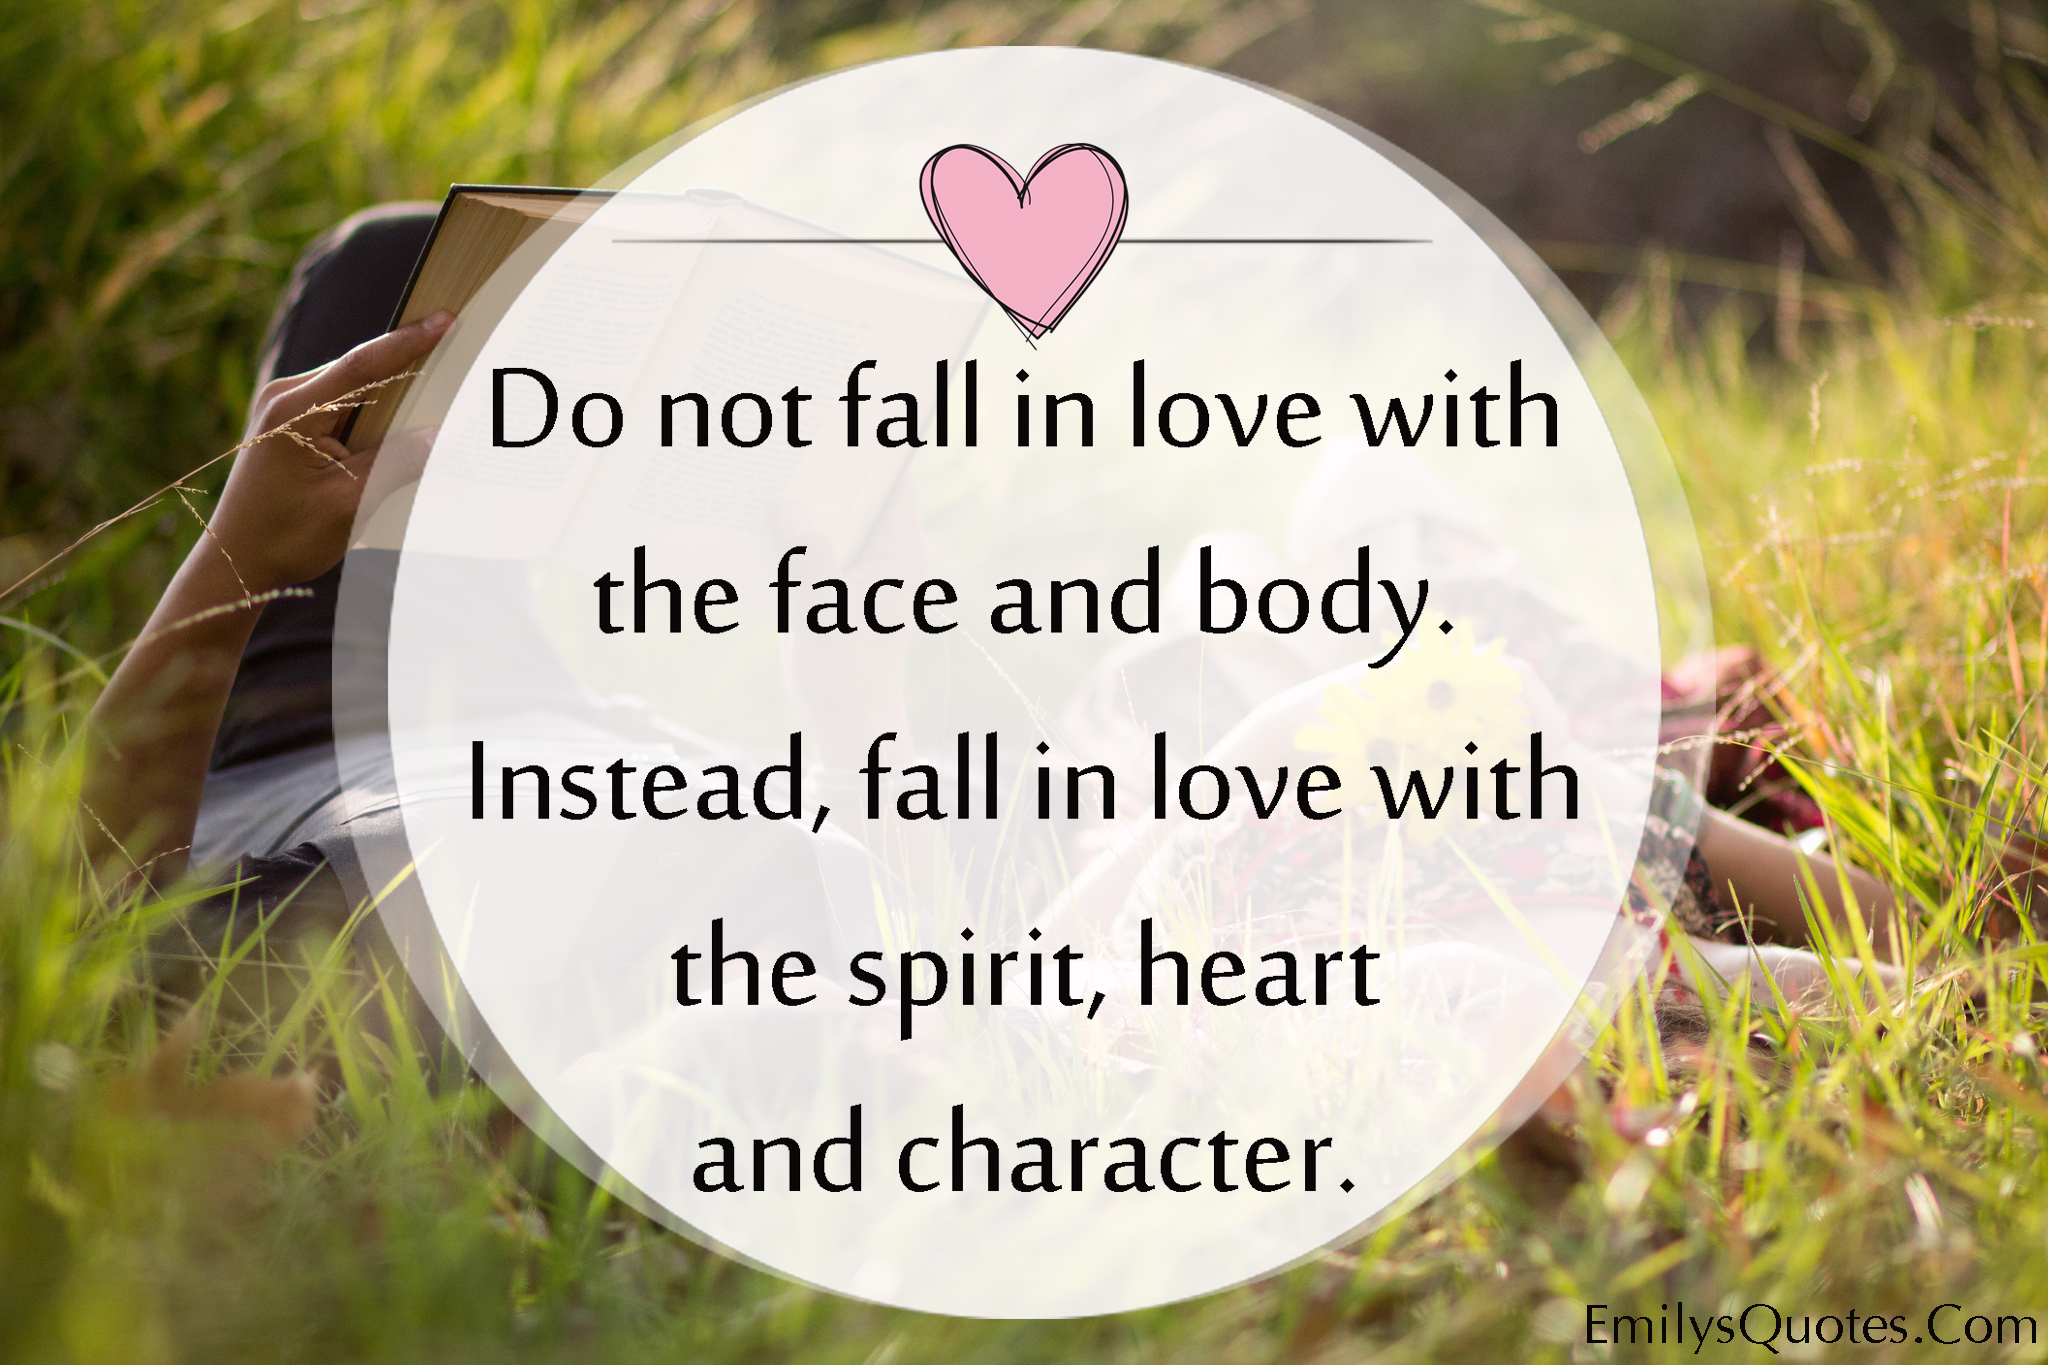 Do not fall in love with the face and body. Instead, fall in love with the spirit, heart and character